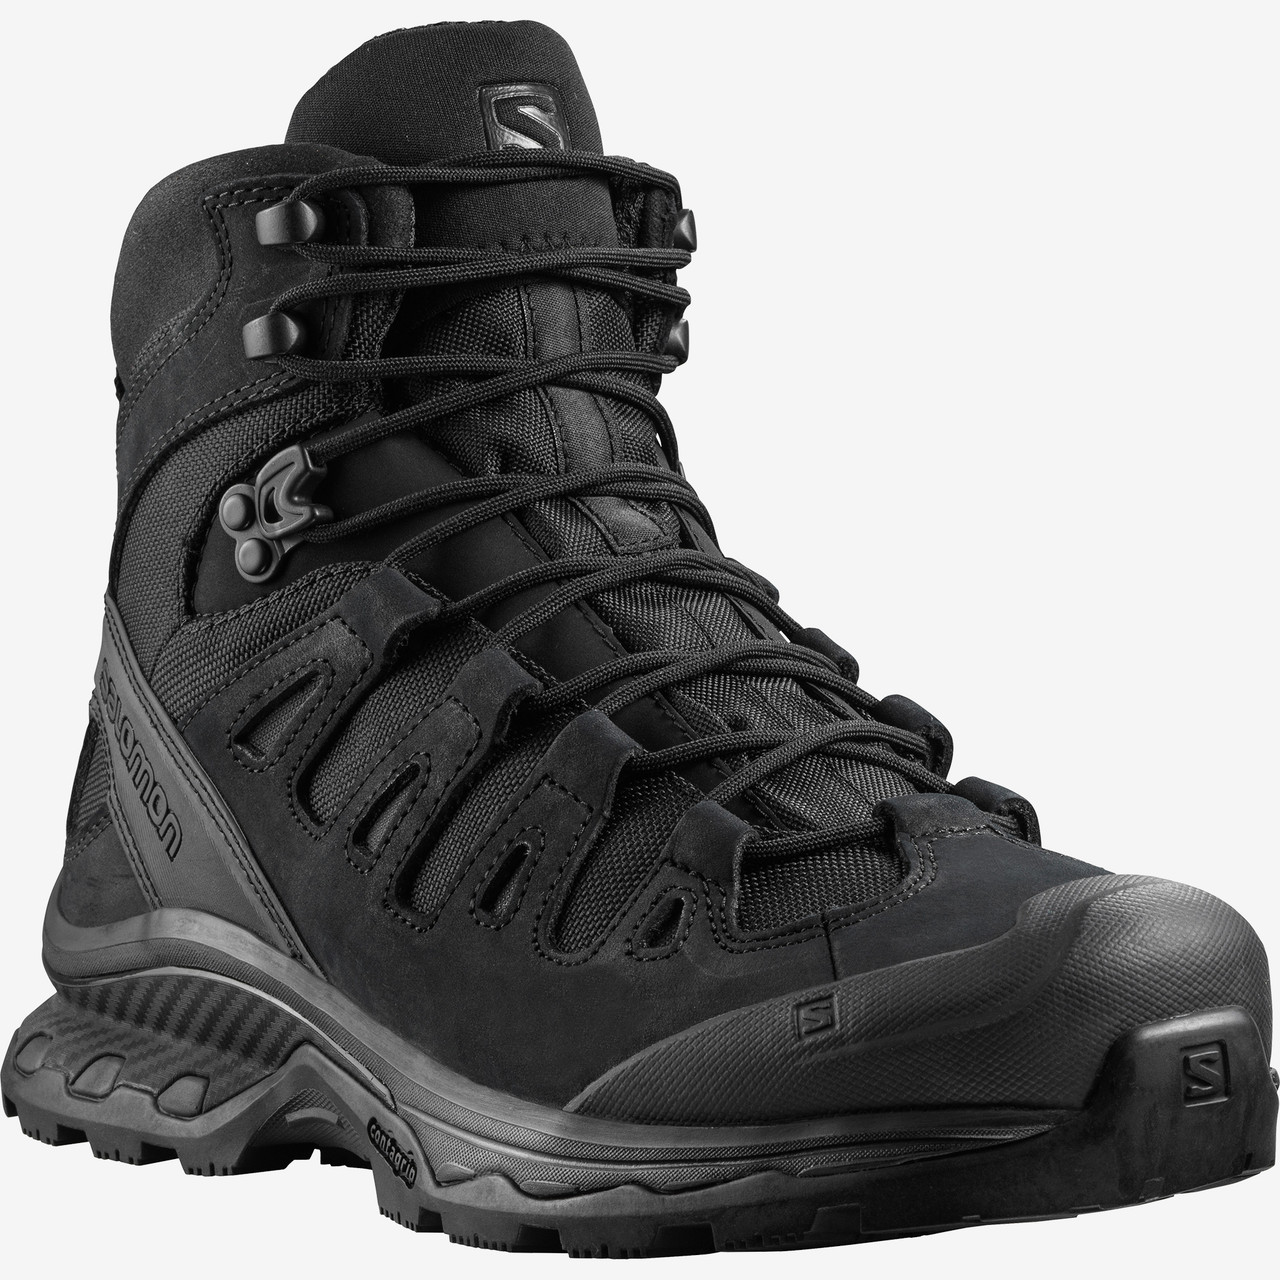 Salomon L40682500 Quest 4D Forces 2 EN Unisex 6 inch Boots, Uniform or Casual, Oil Slip Resistant, available in Black and Ranger Green - Dana Supply